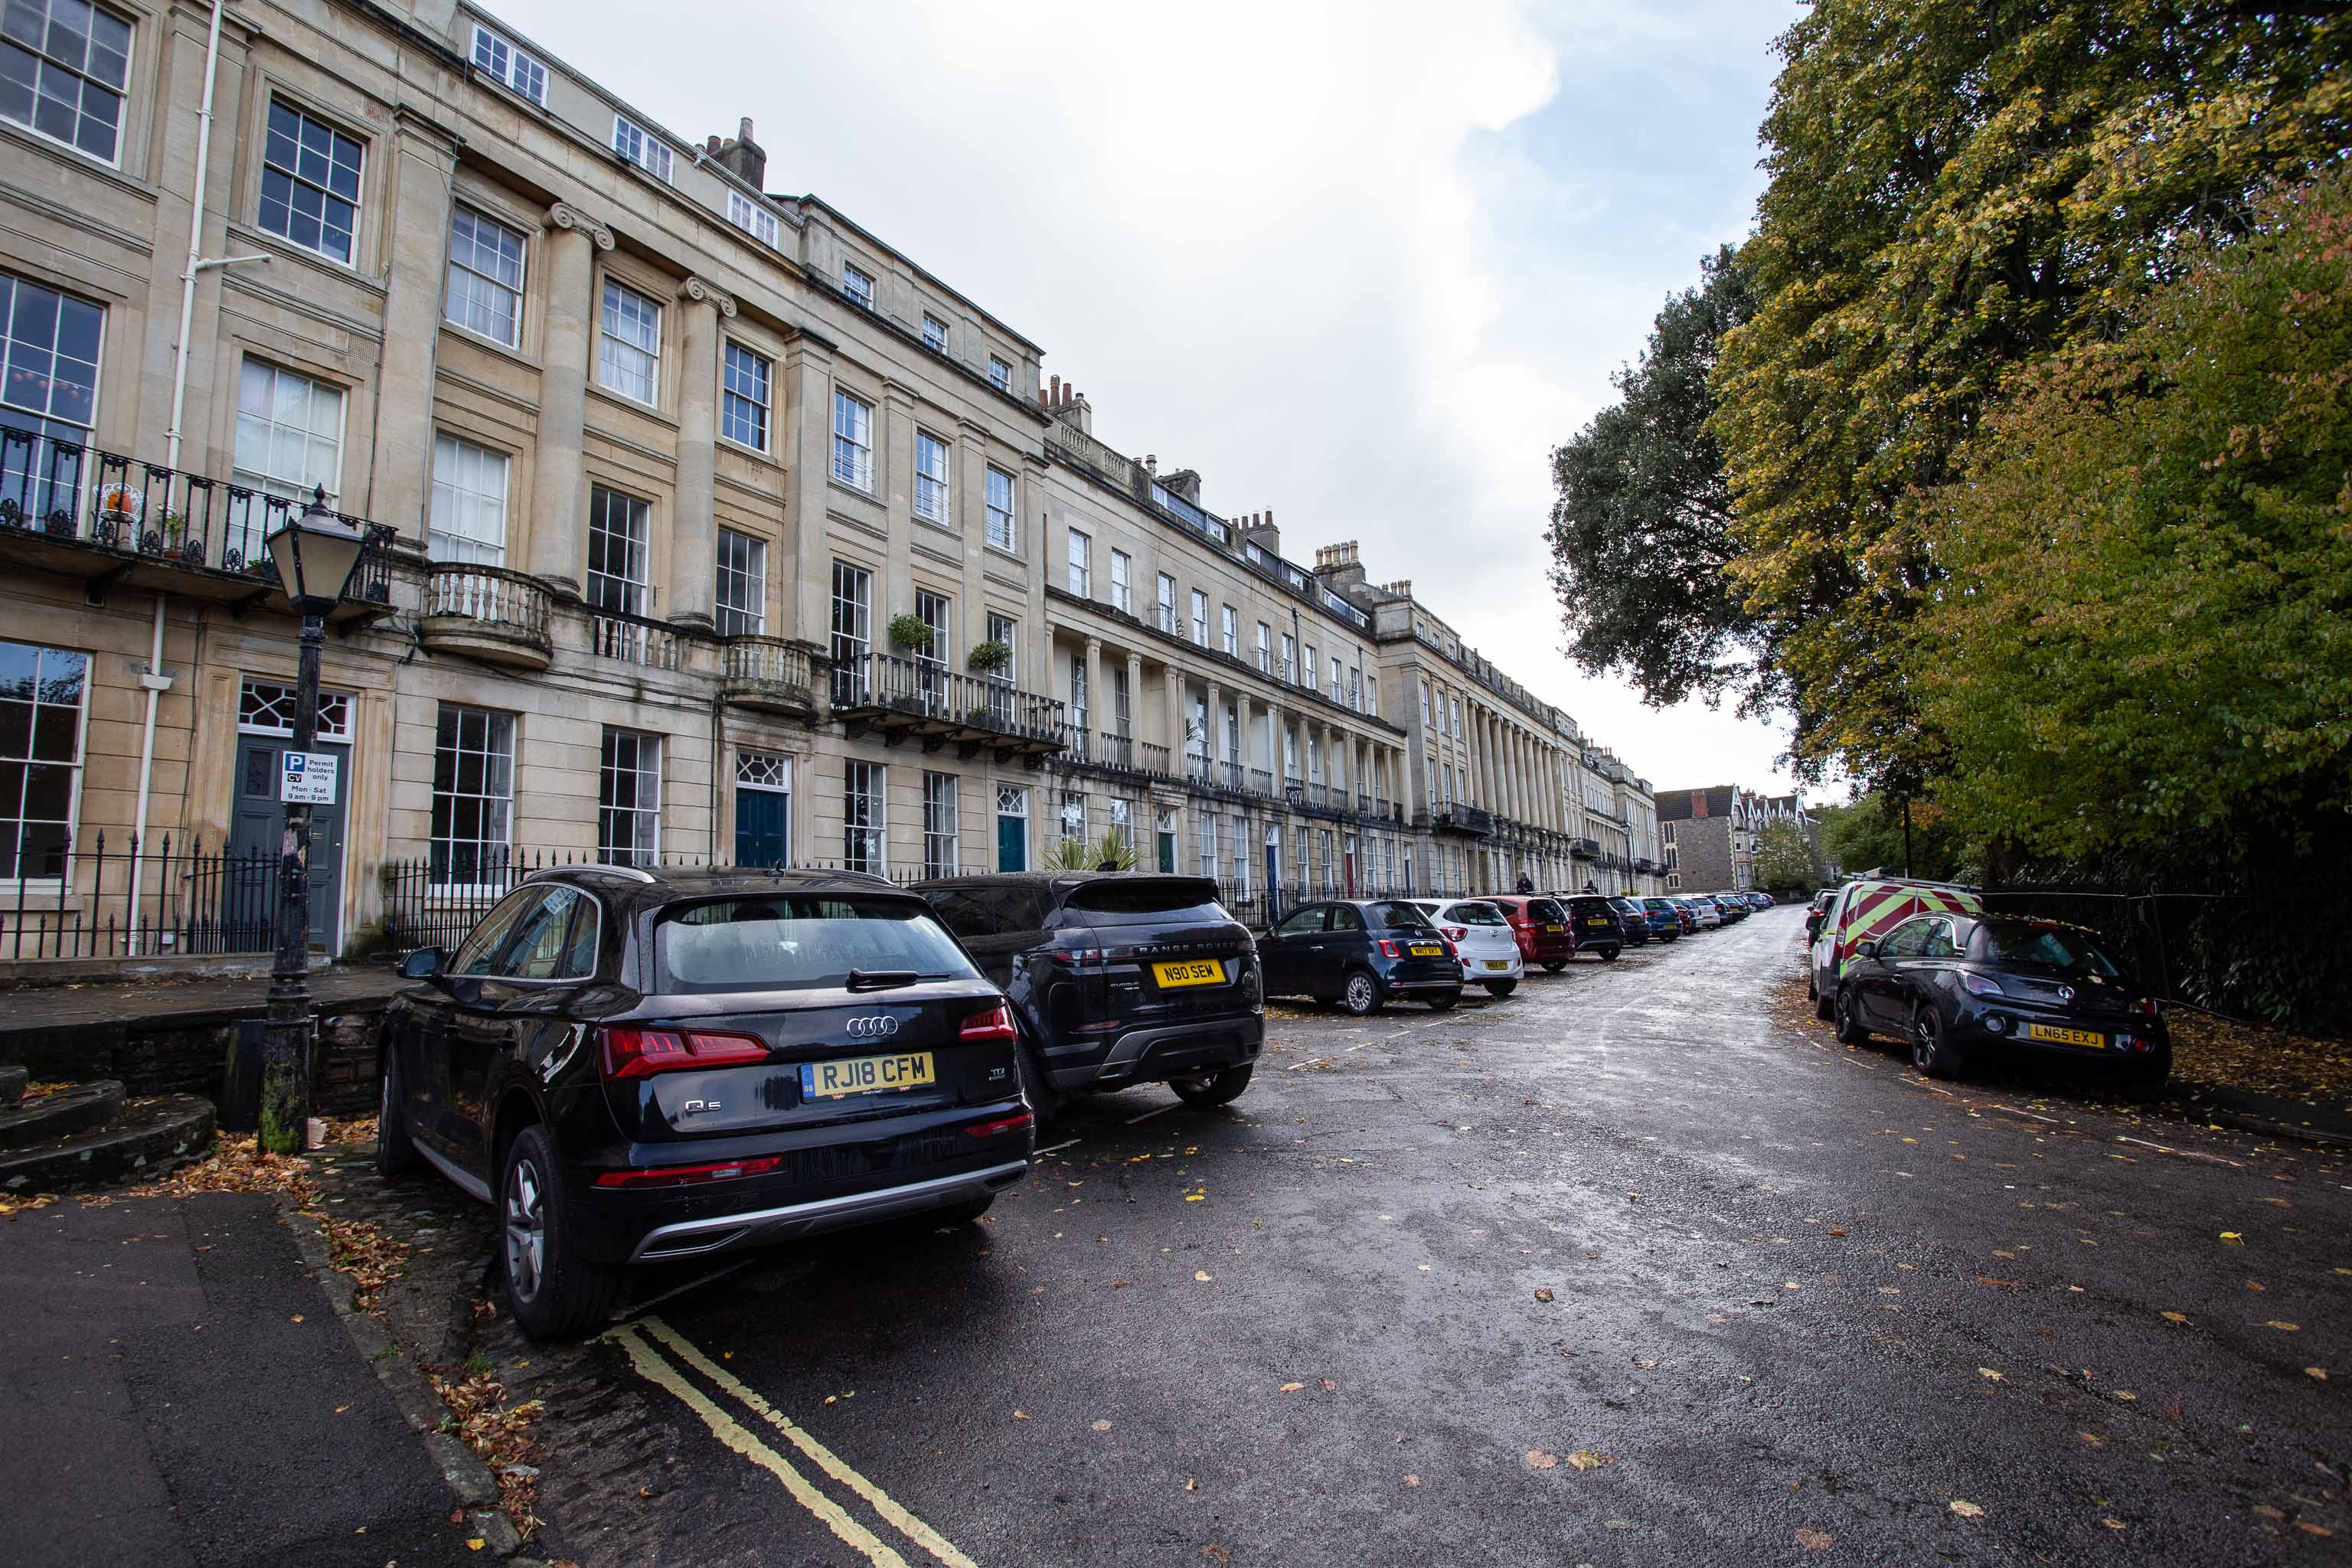 The Other End of Vyvyan Terrace
Of course, one disadvantage of a wide-angle lens in Clifton is that you get even more cars in the shot. This is a problem with filming, too, from w...